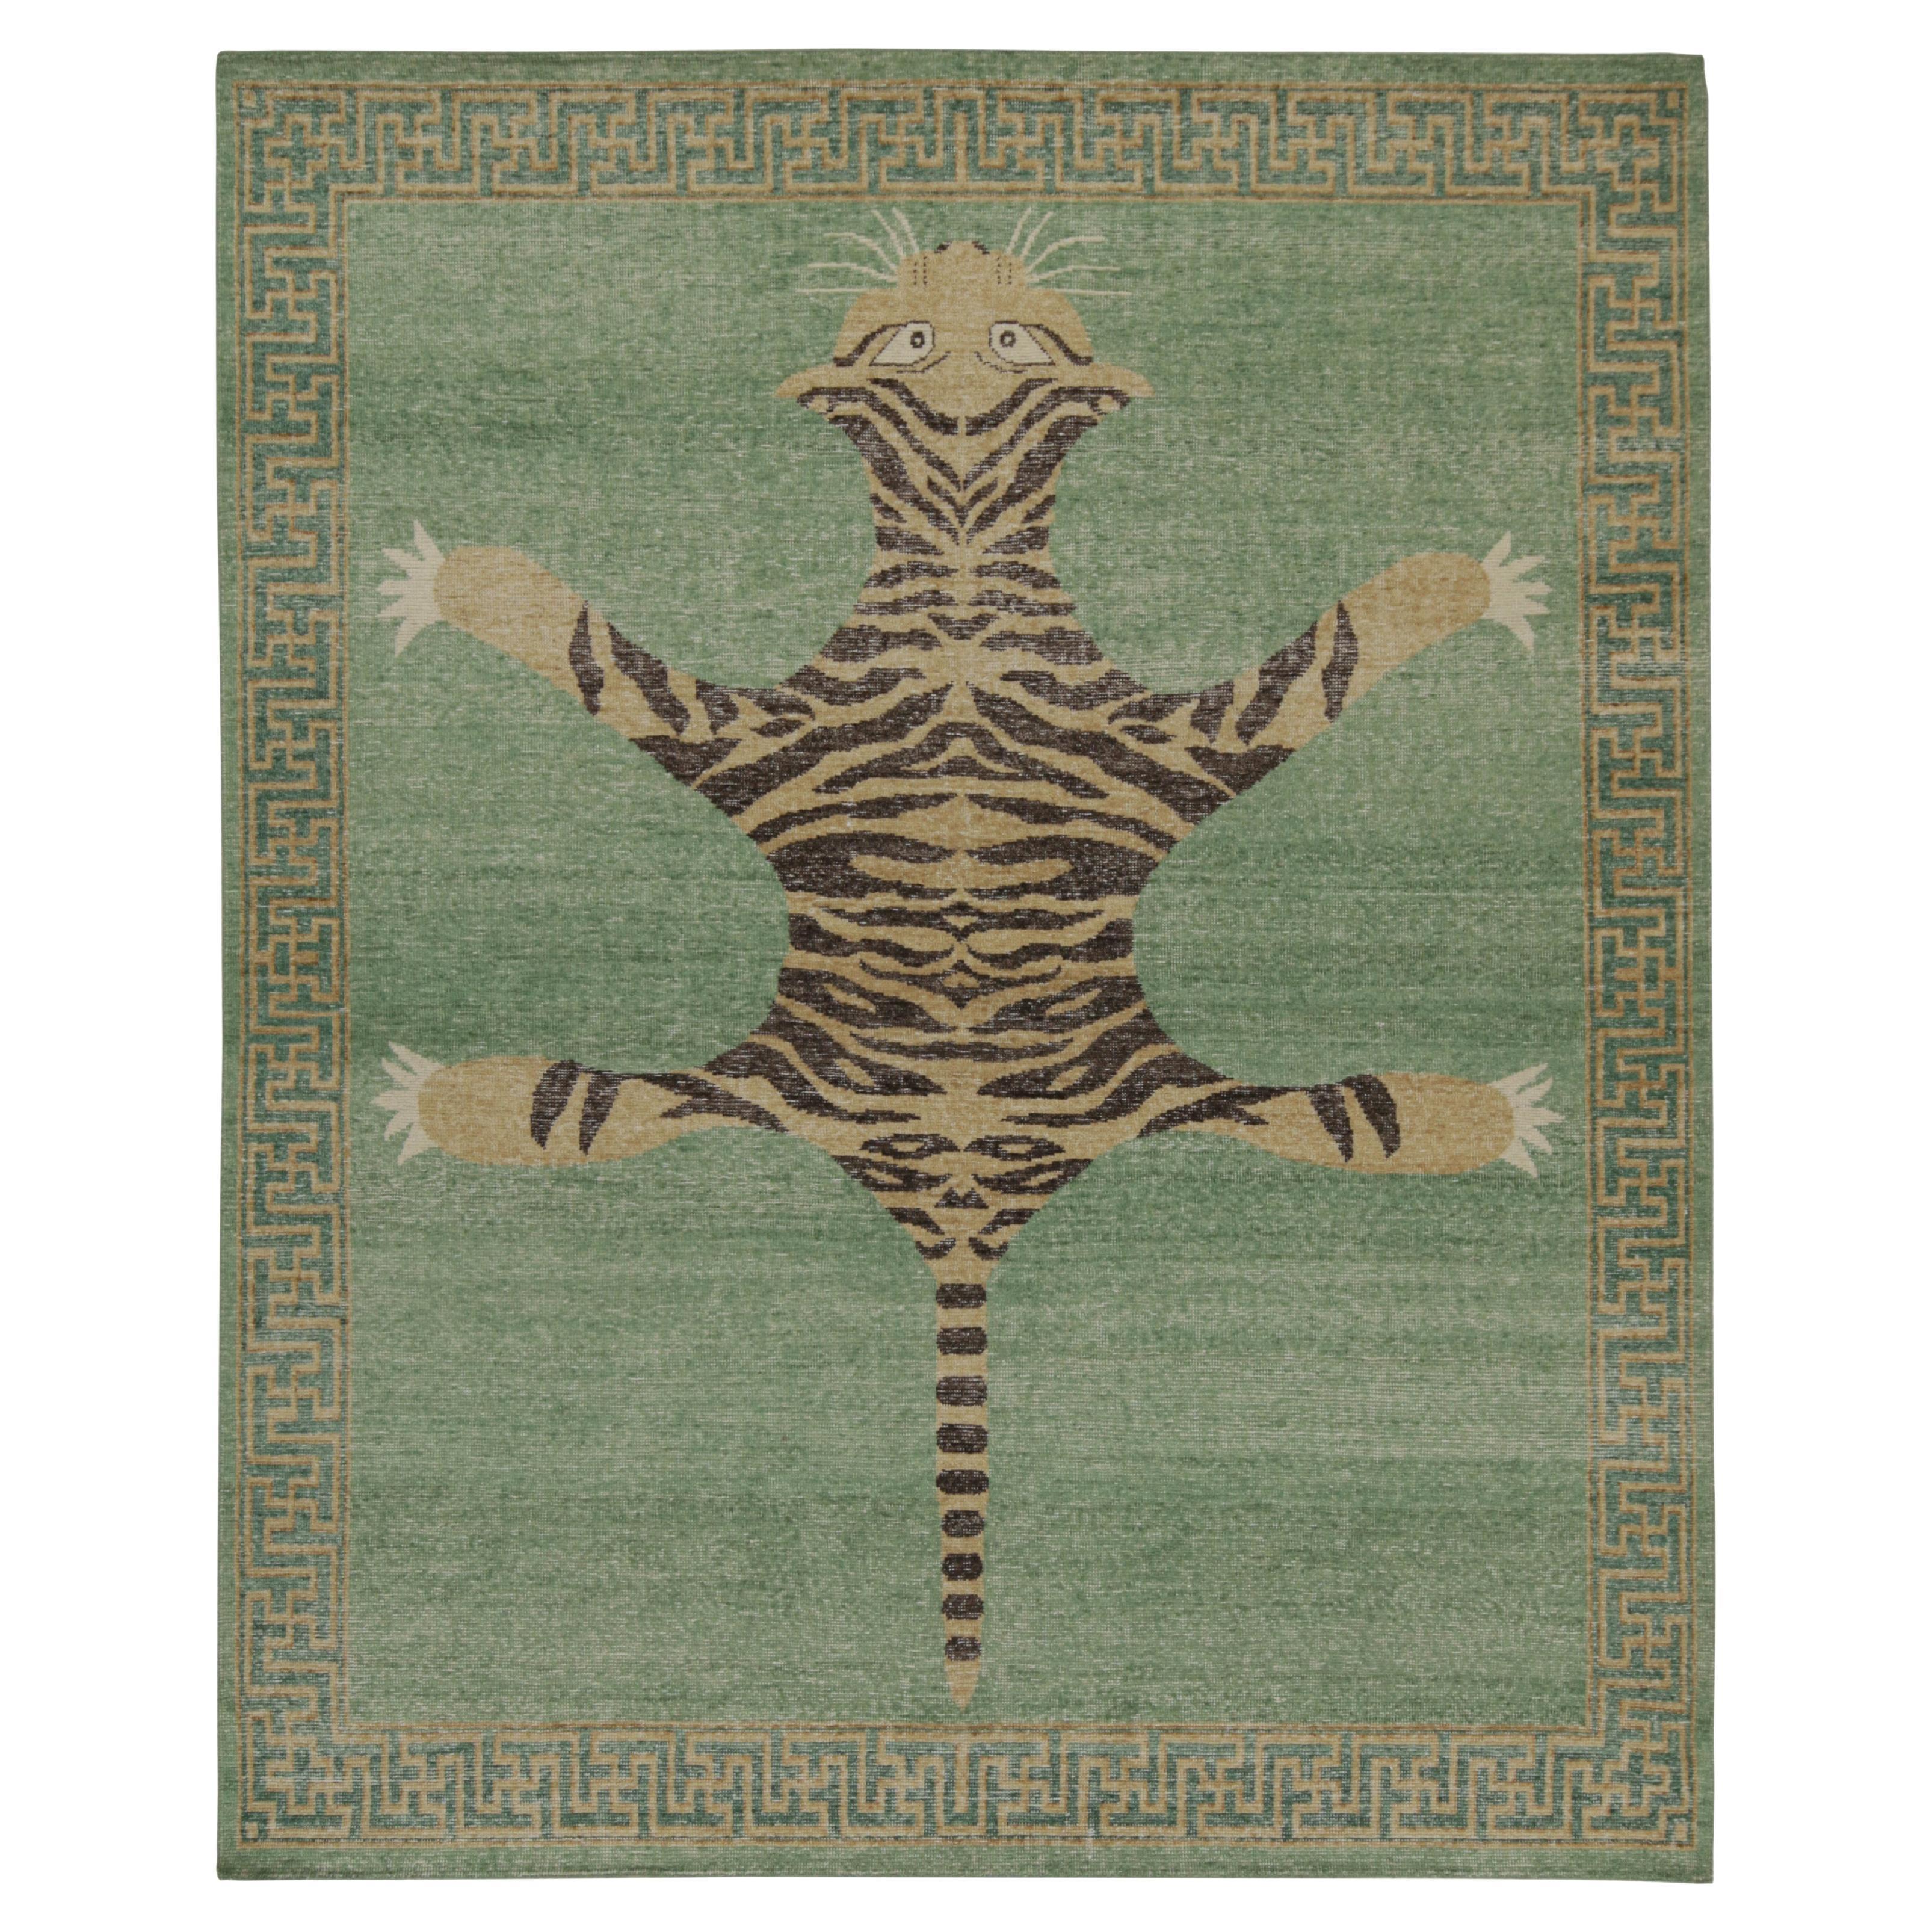 Rug & Kilim’s Distressed Style Tiger Runner in Green, Beige & Black Pictorial For Sale